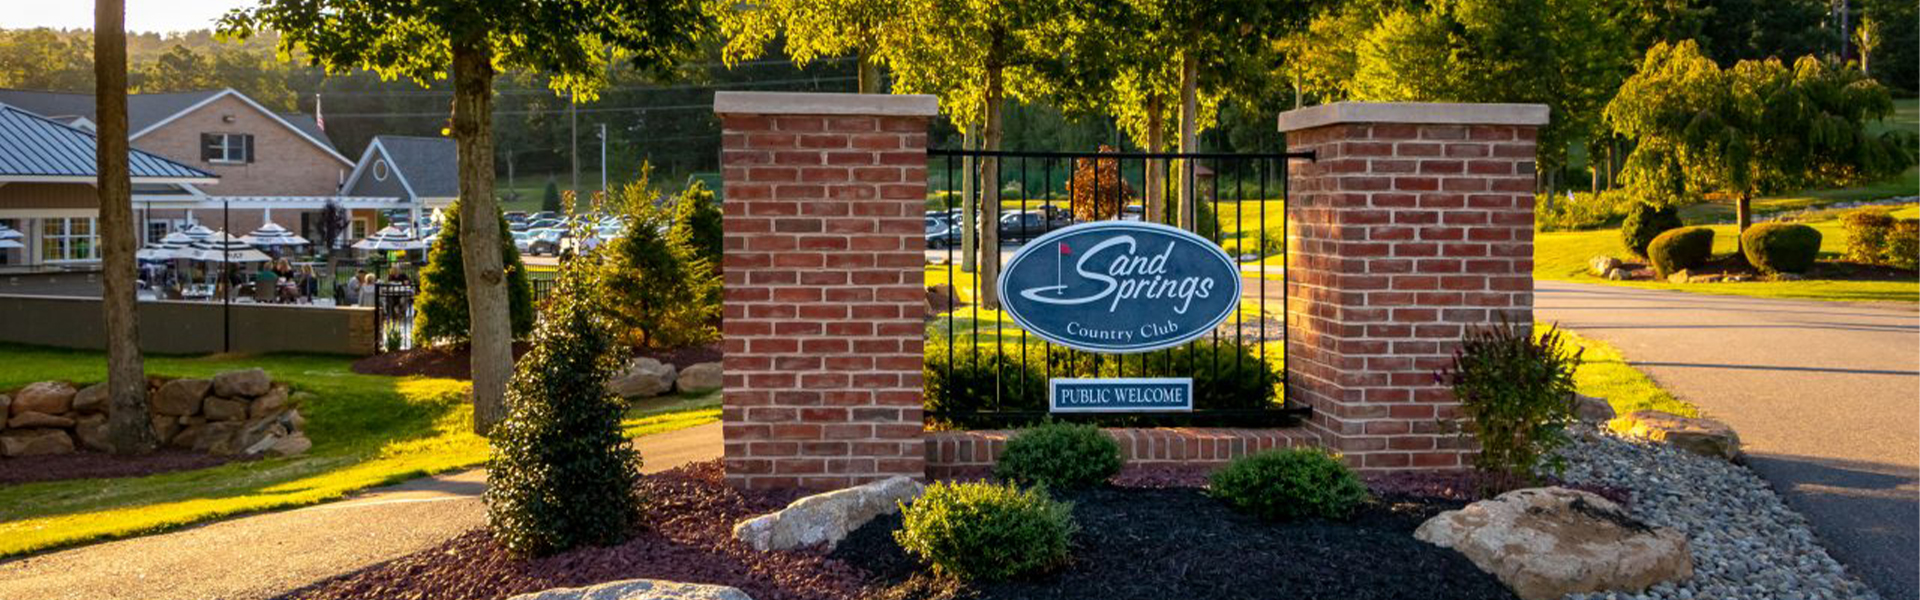 sand springs country club sign